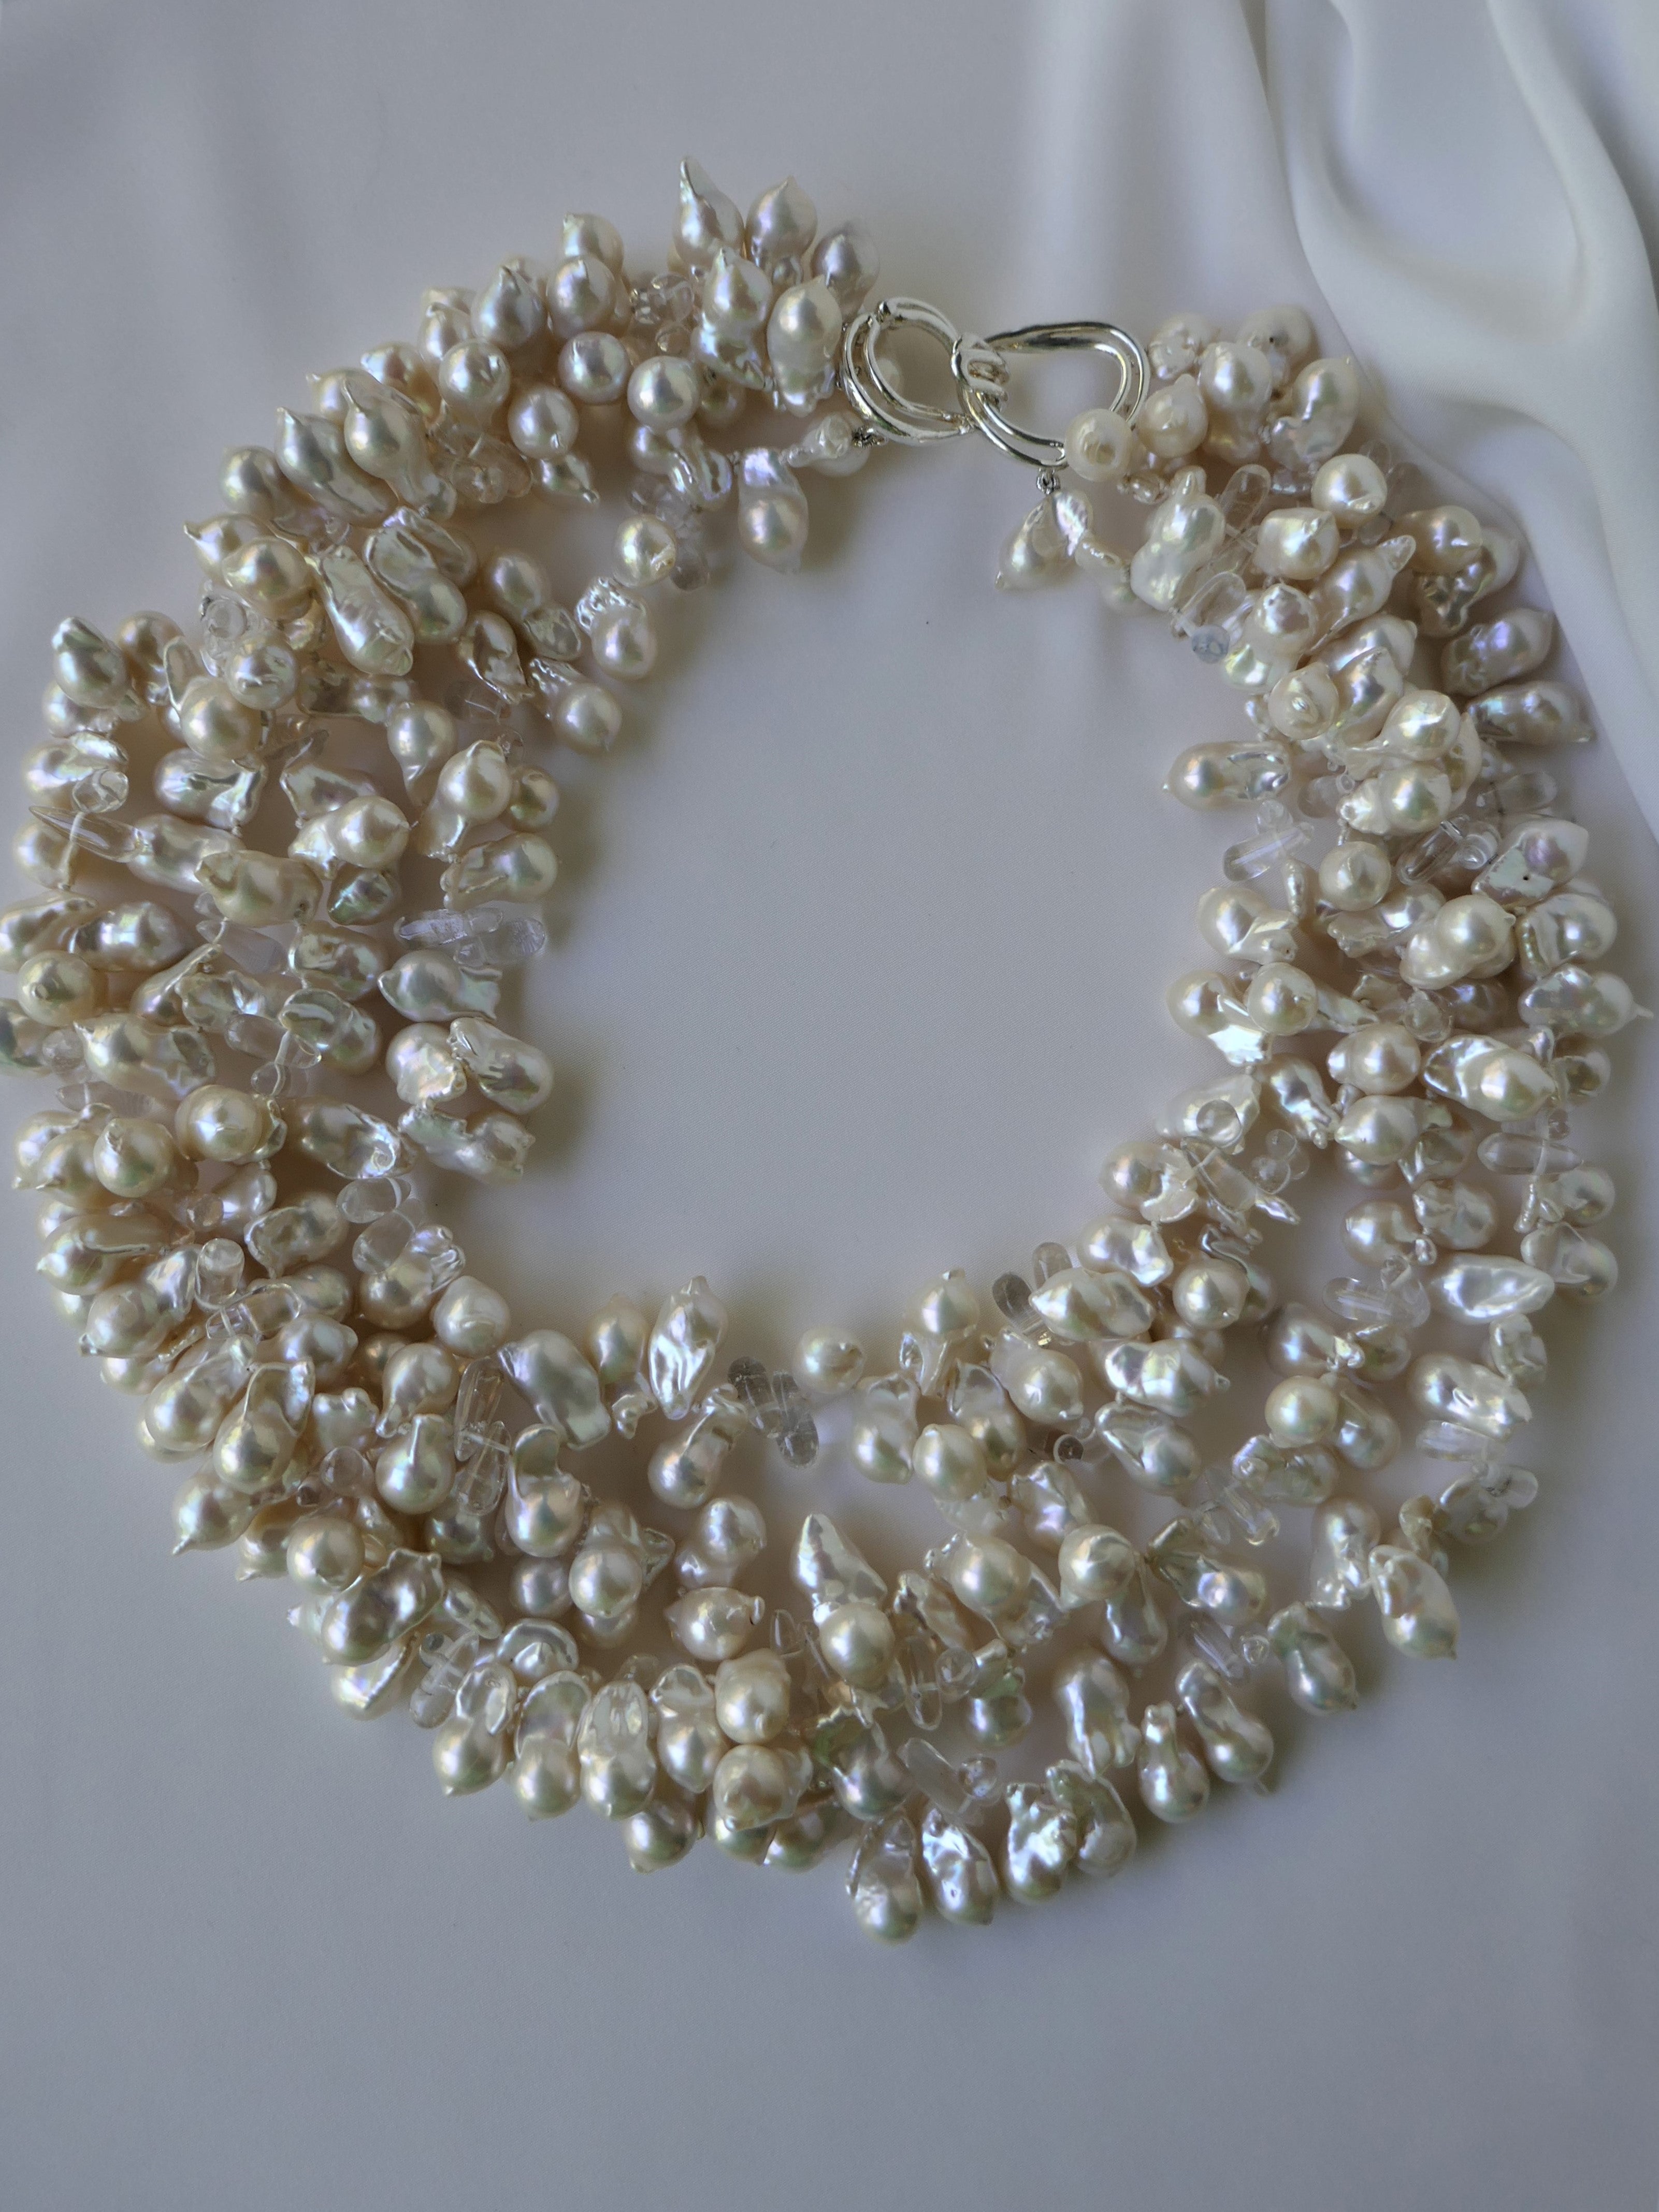 Four Strand Akoya Cultured Pearls and Rock Crystal Briollets Statement Necklace.